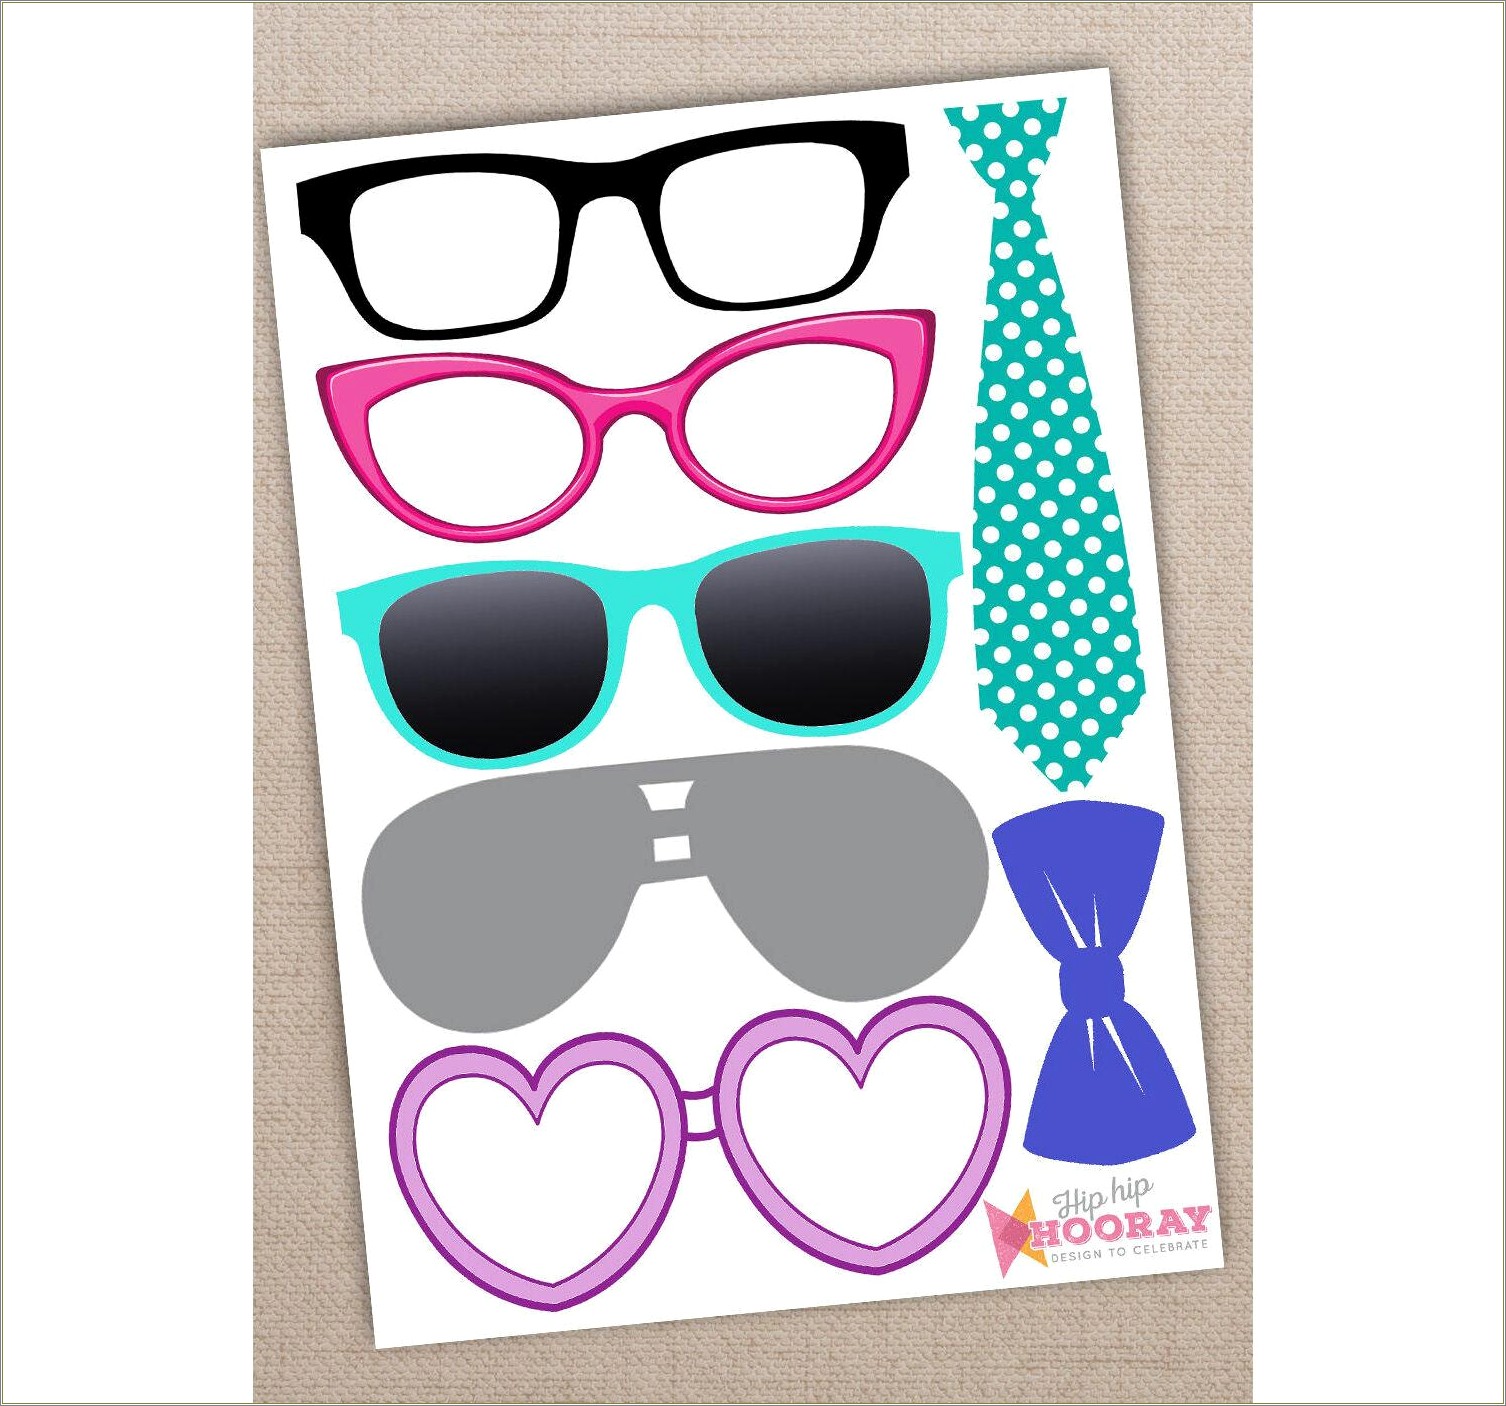 Alice In Wonderland Photo Booth Props Template Free